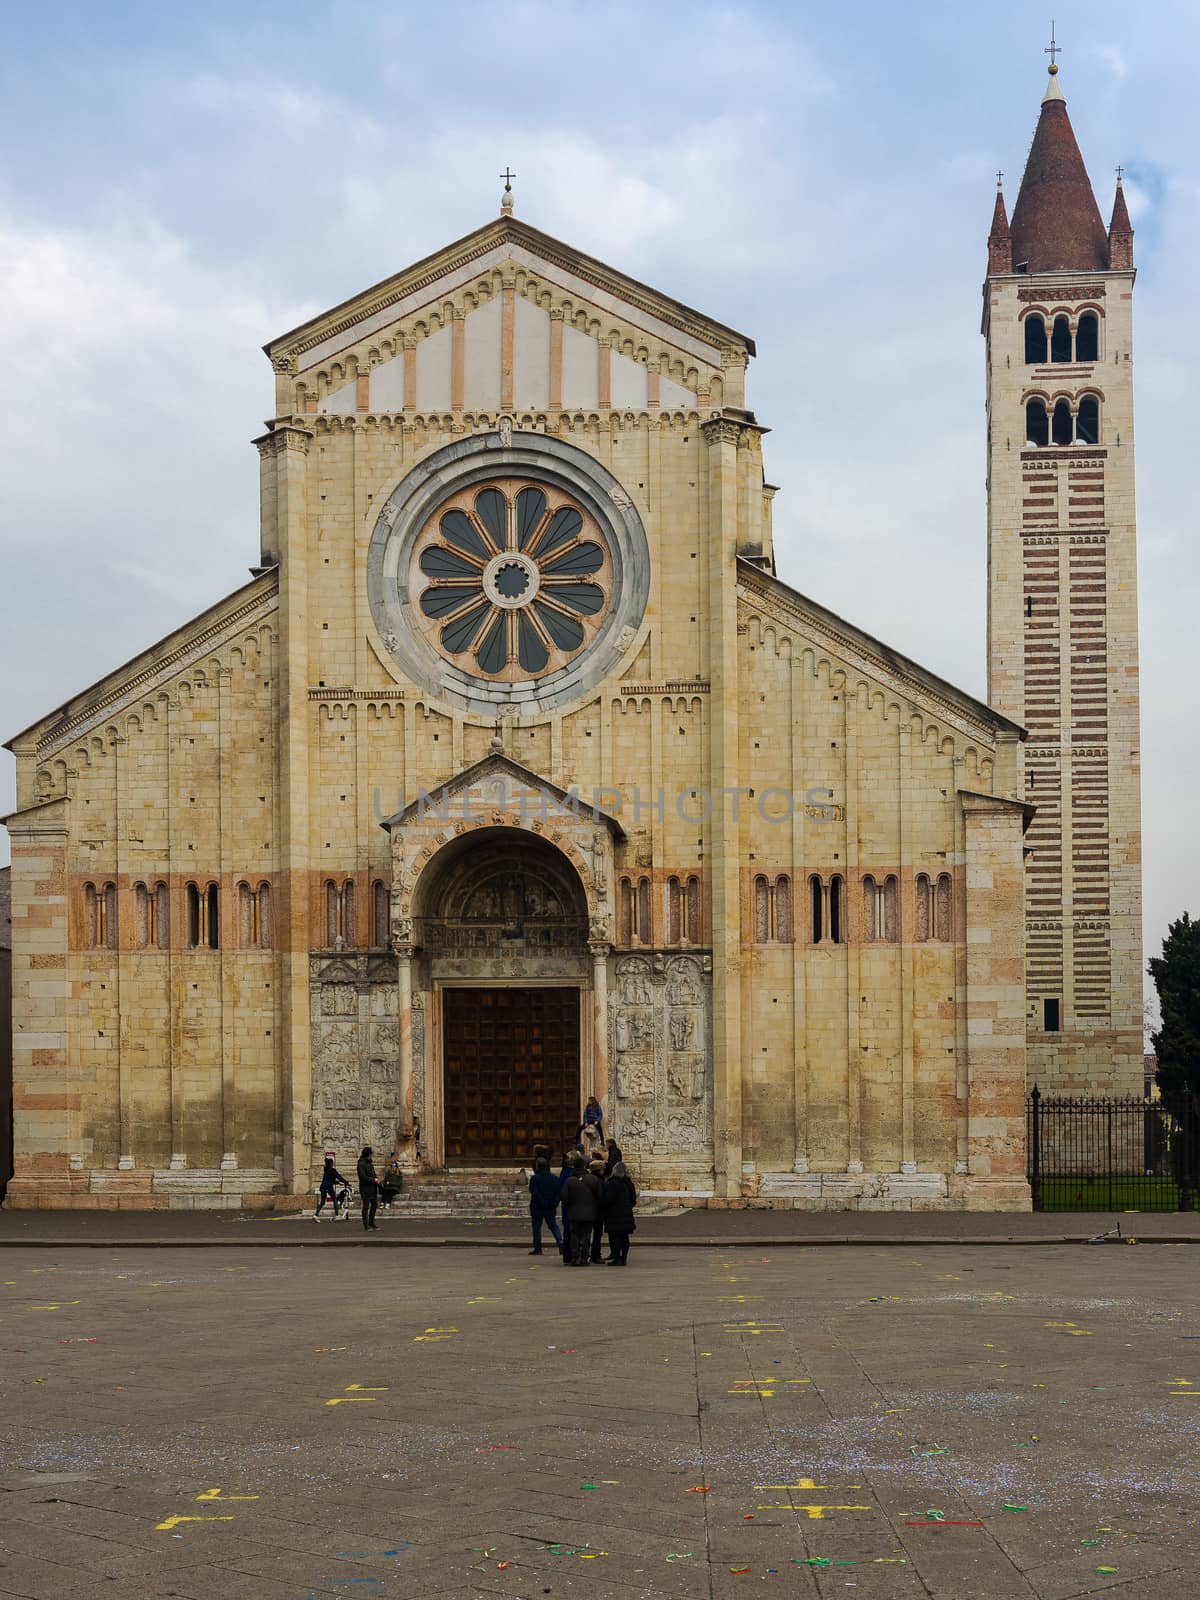 The church of San Zeno, one of the most important of Verona